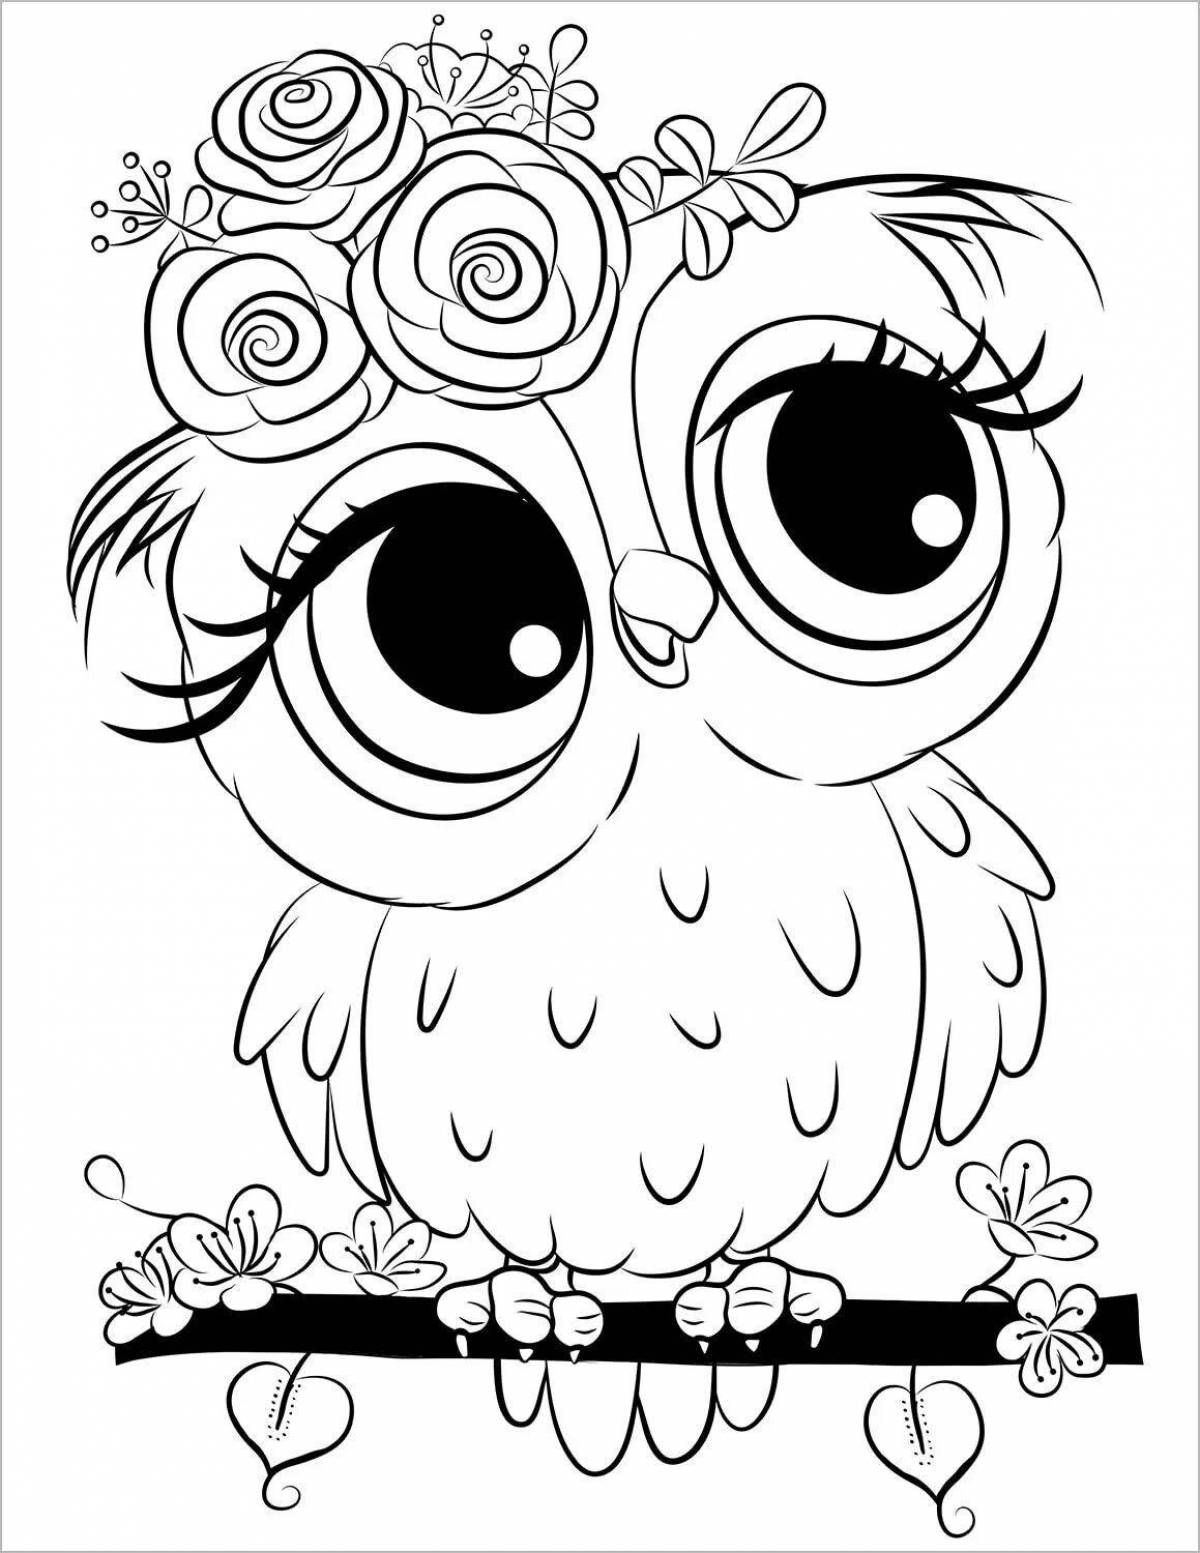 Colorful cute owl coloring book